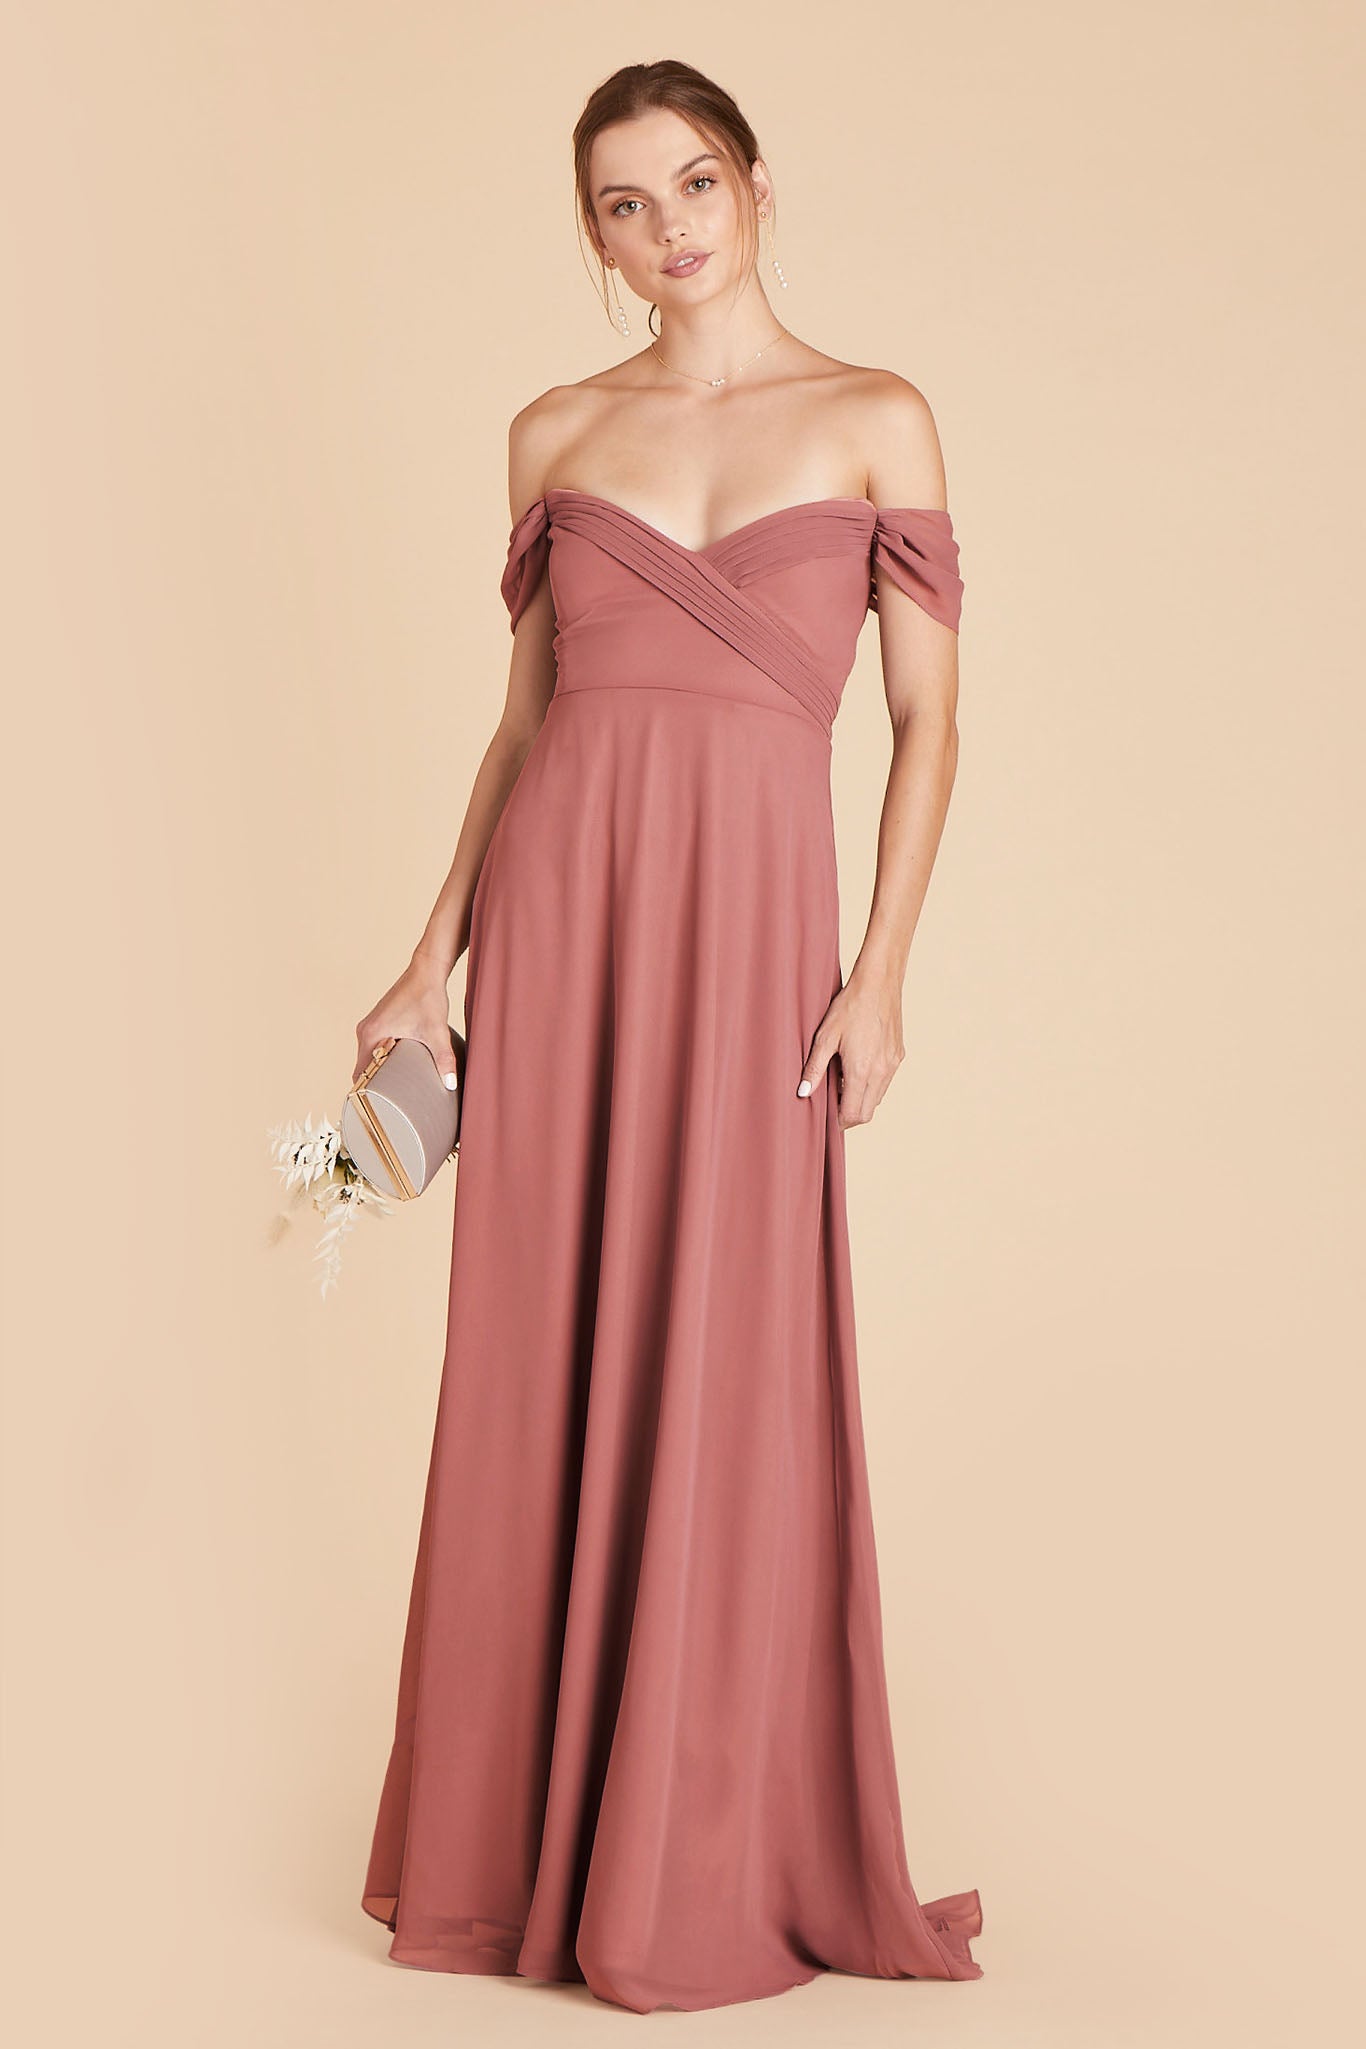 Spence Convertible Dress - Mulberry